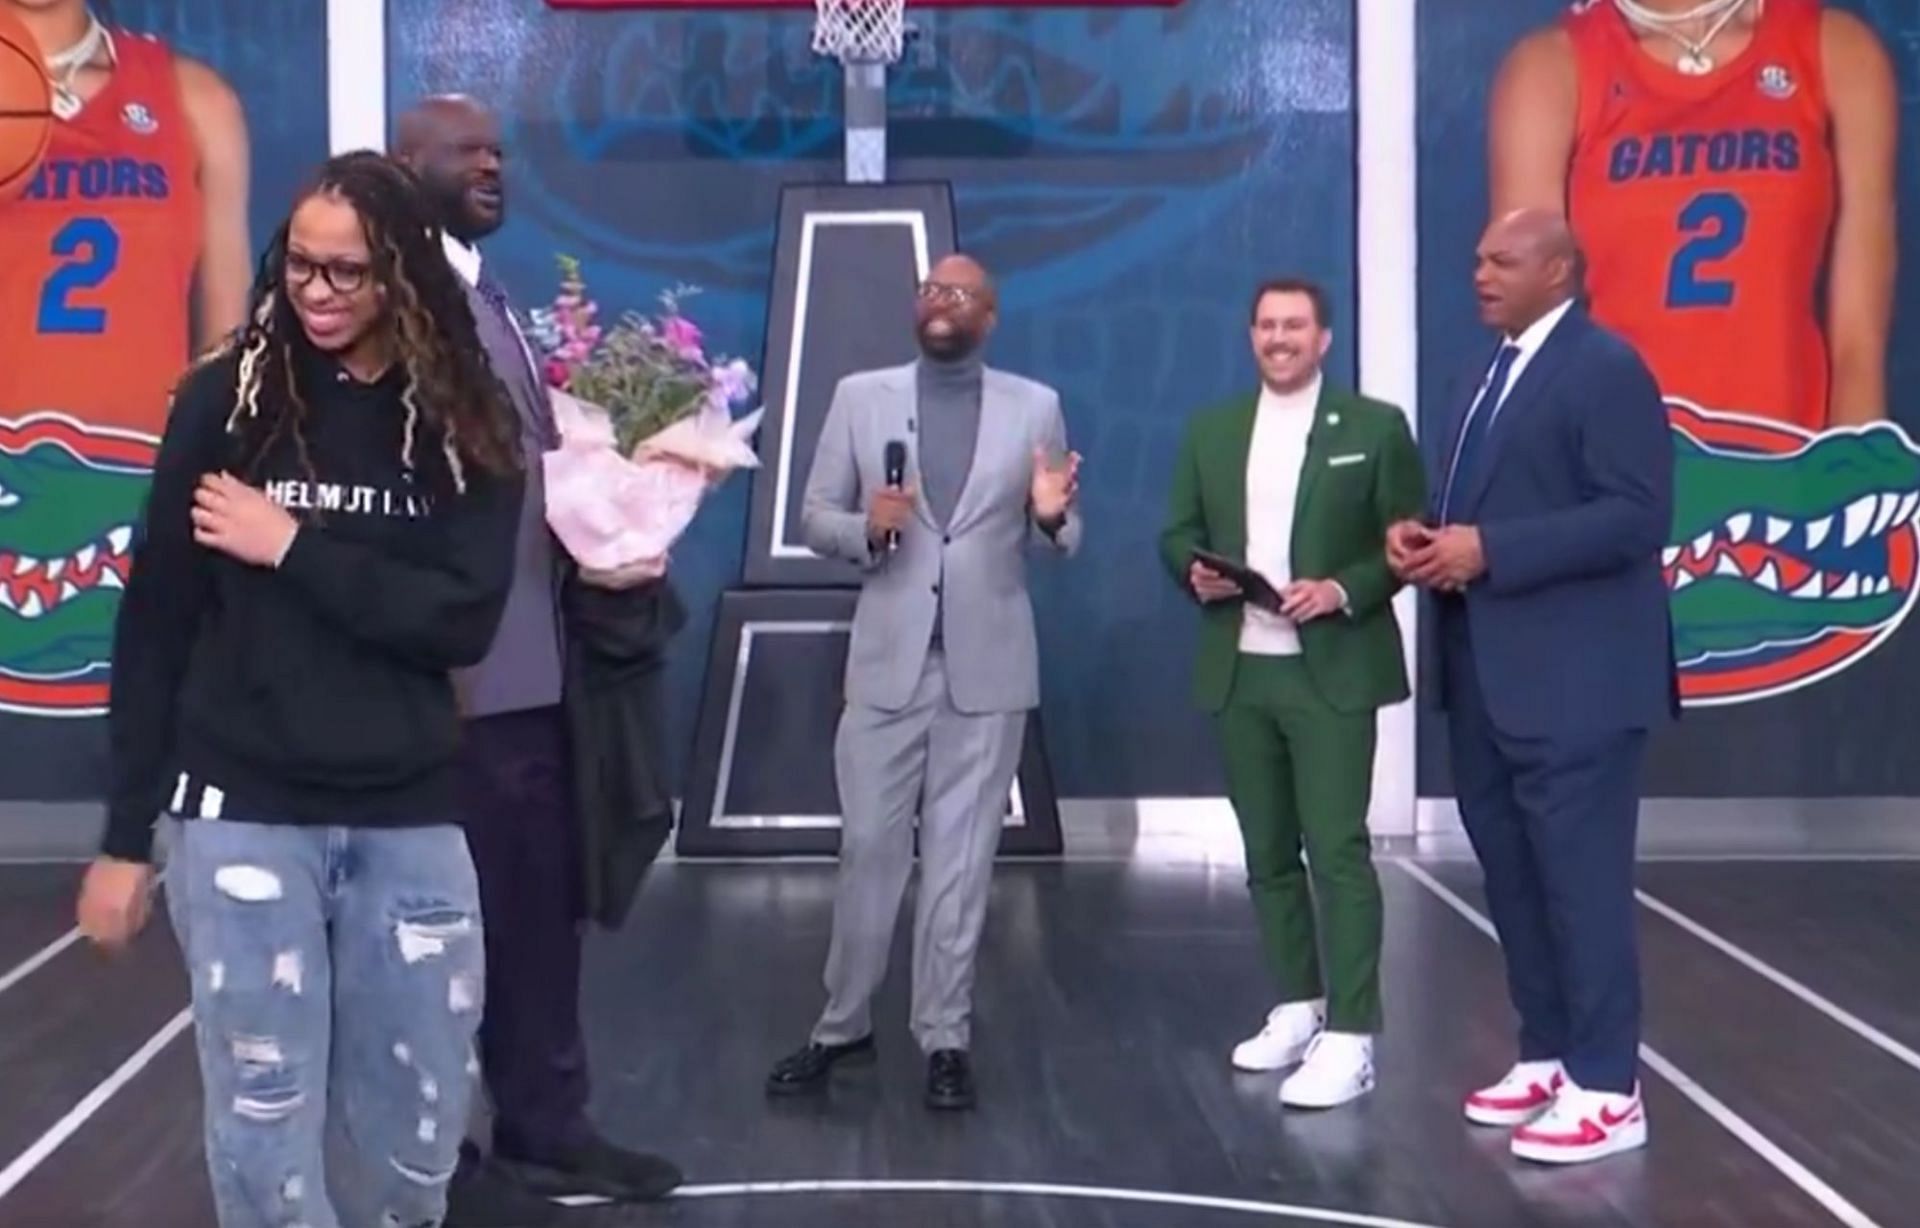 Kenny Smith pokes fun at Charles Barkley while introducing Shaquille O